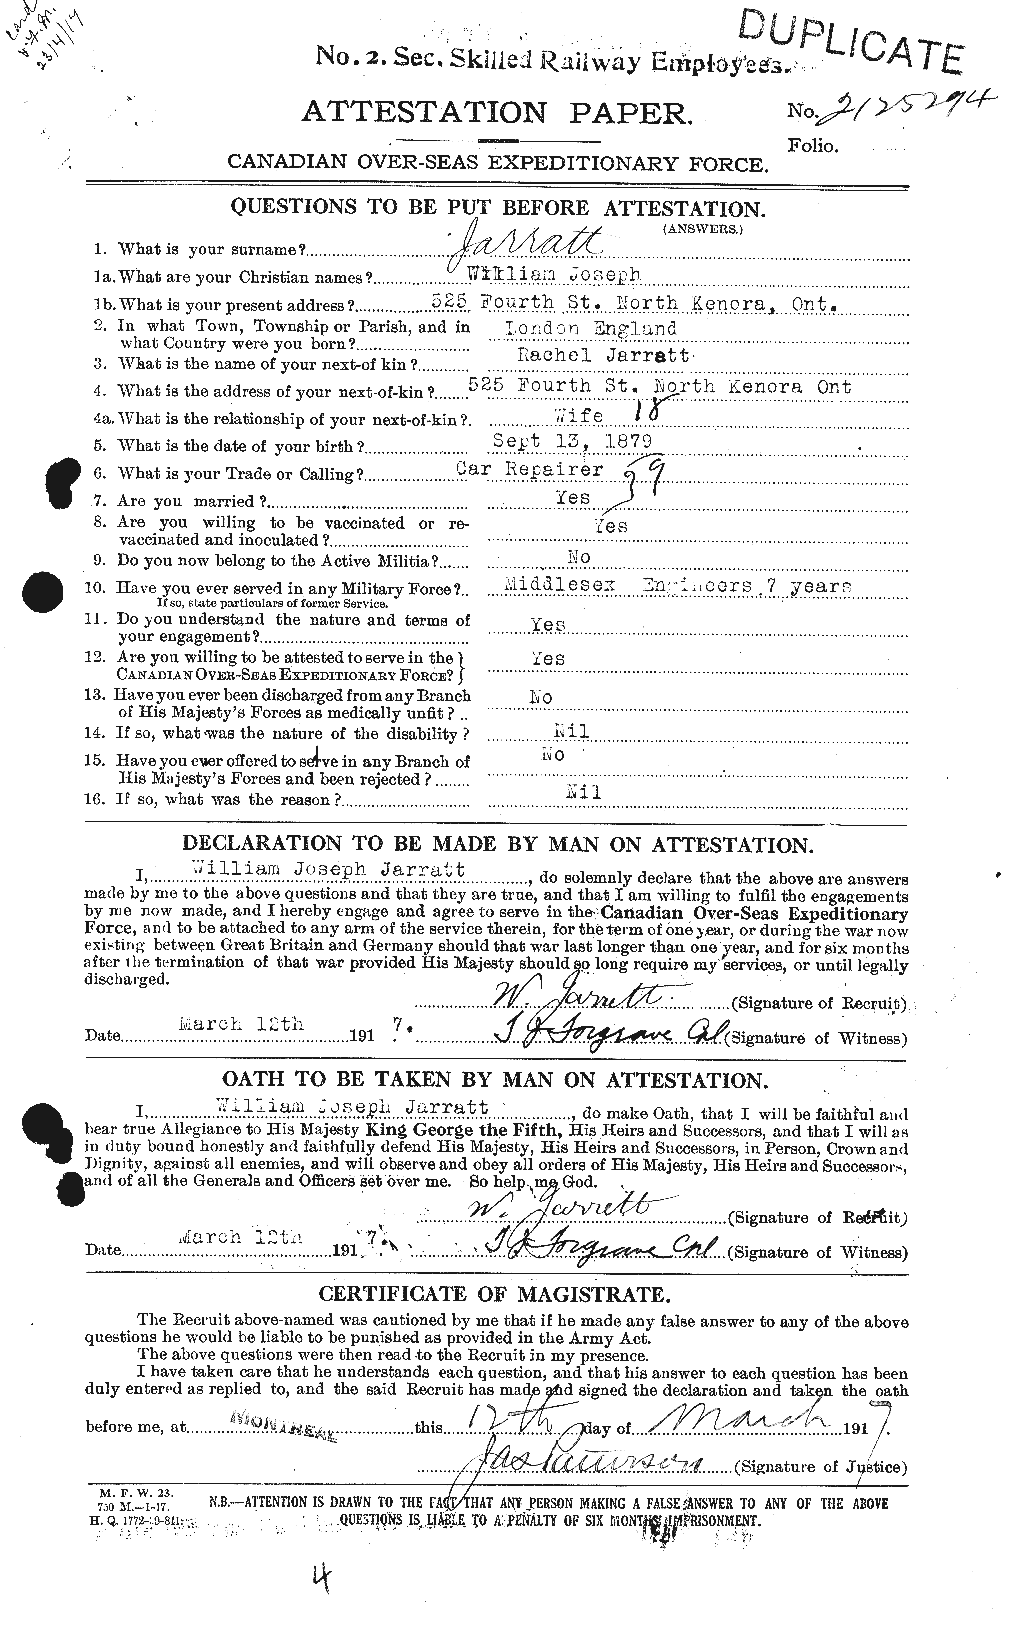 Personnel Records of the First World War - CEF 416921a